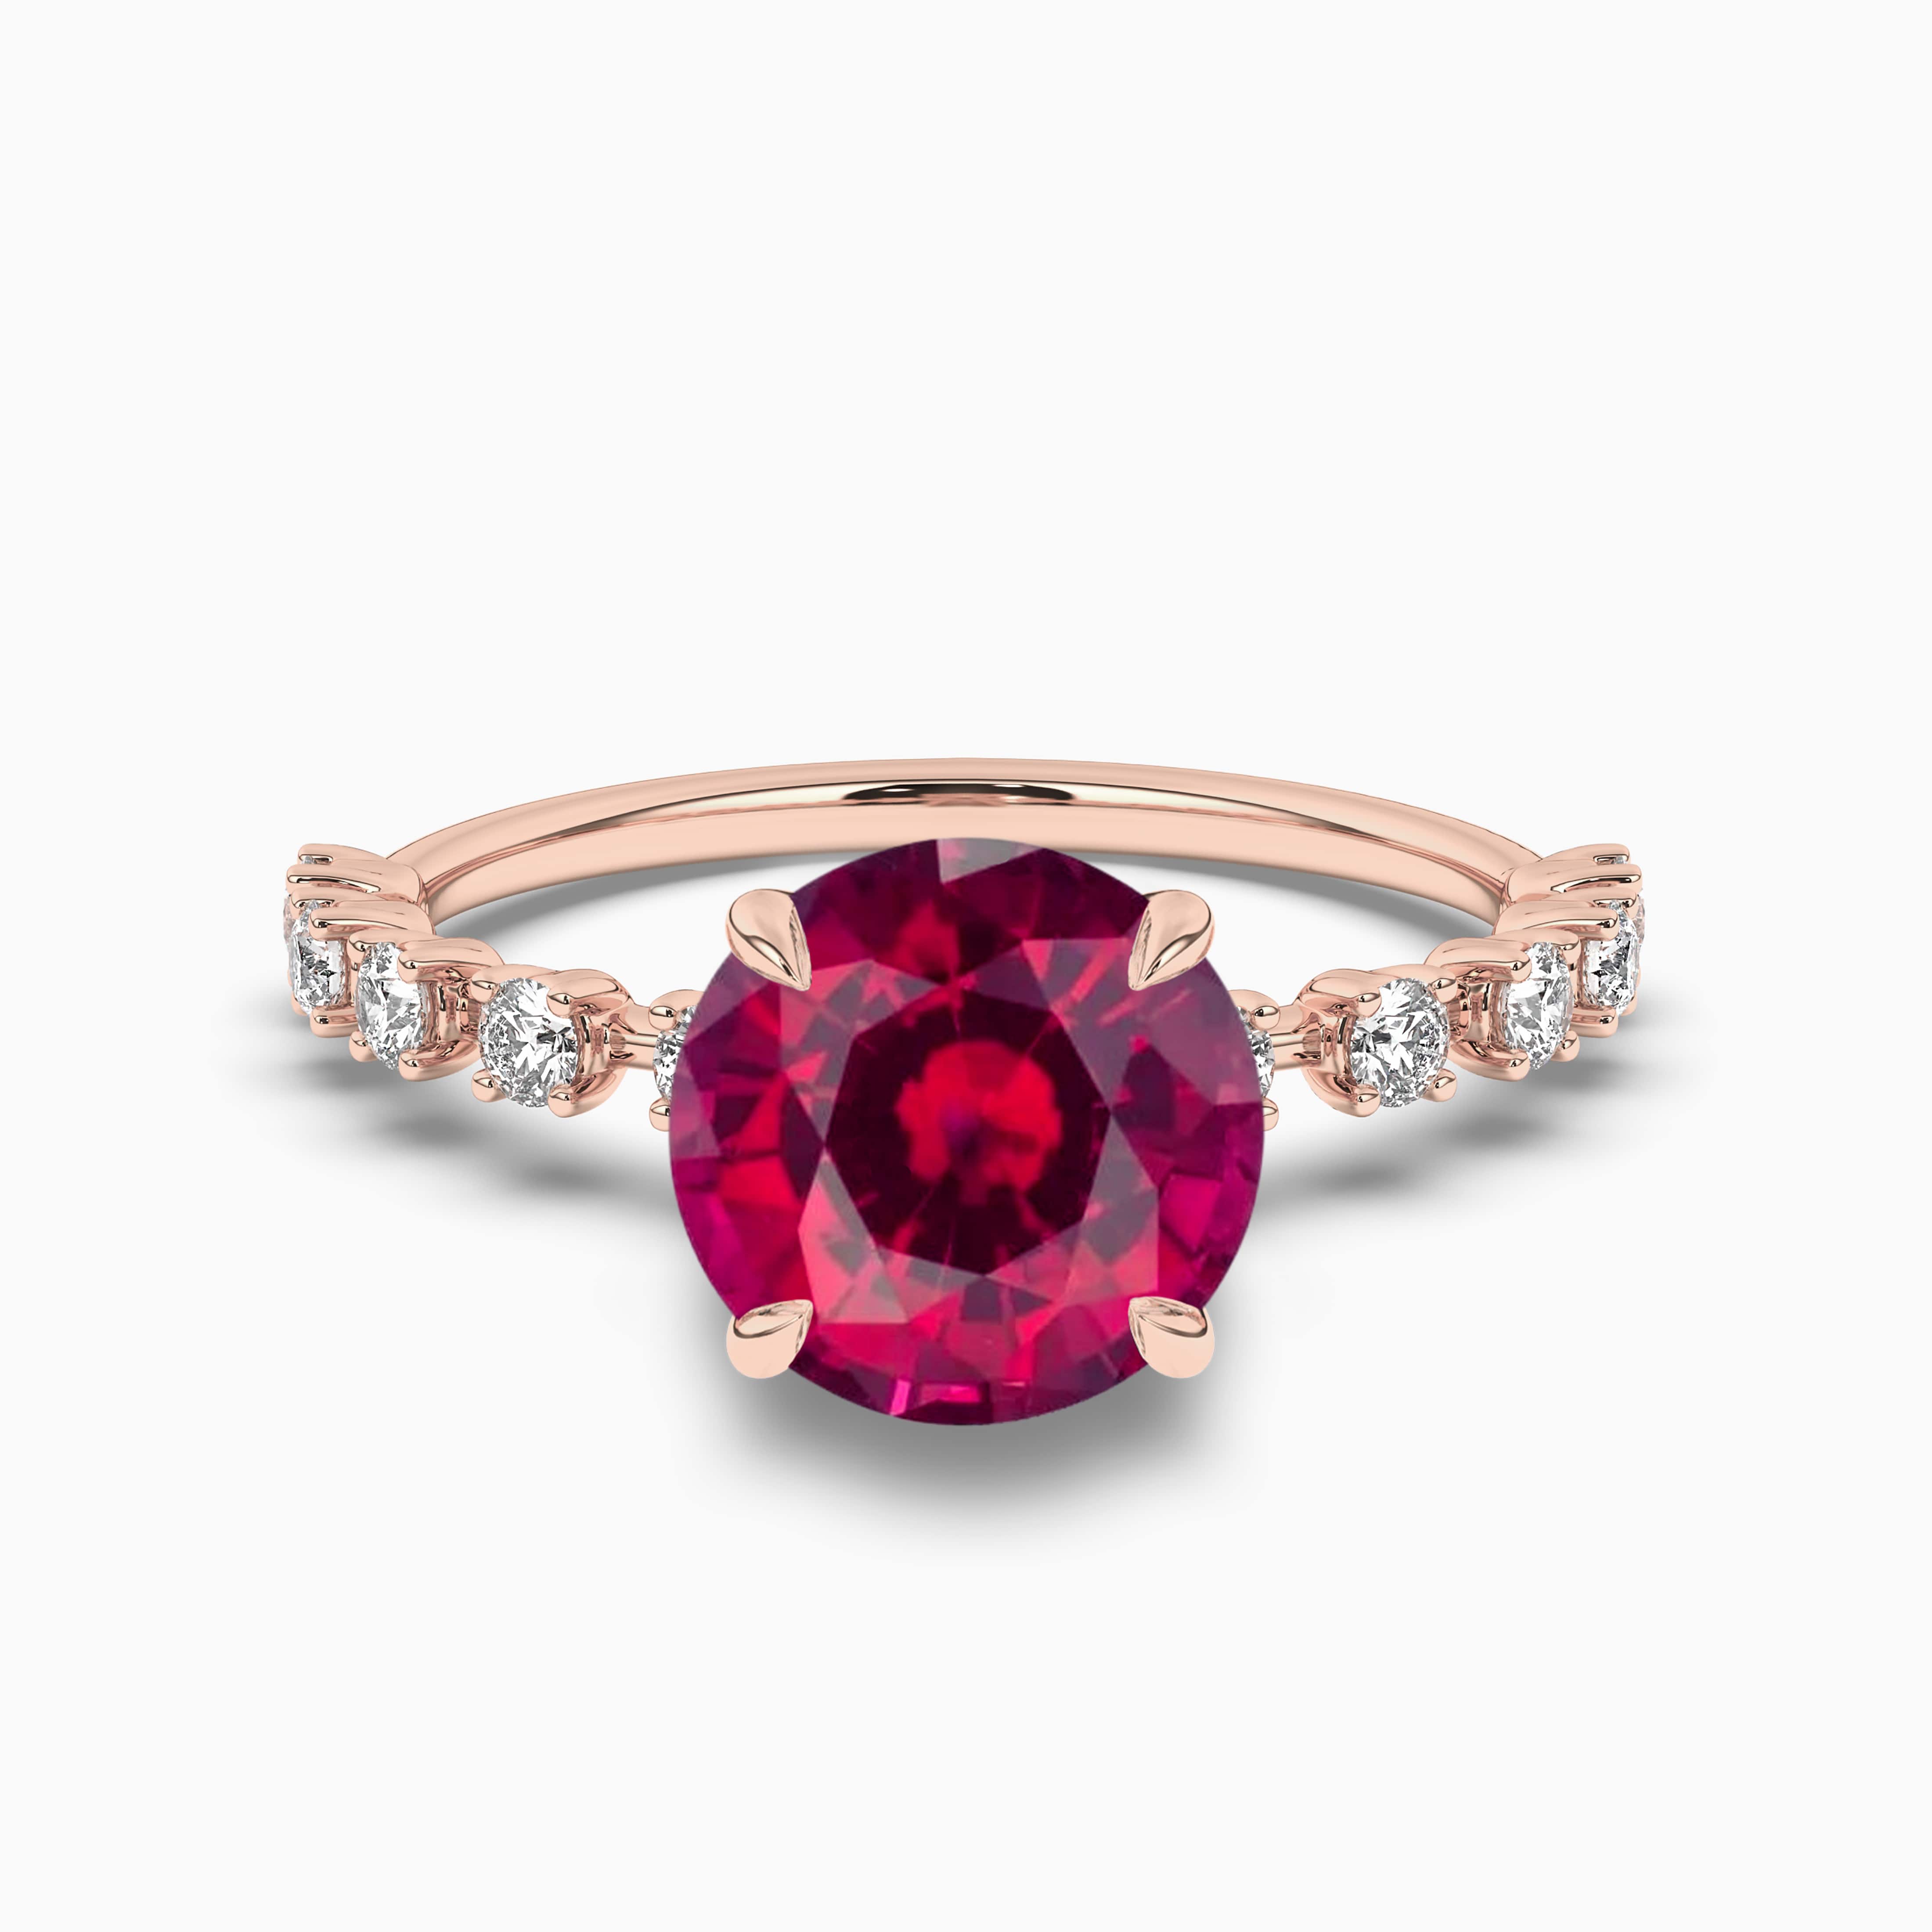 ROUND CUT RED RUBY GEMSTONE   ENGAGEMENT RING WITH ROUND WHITE DIAMOND ACCENTS IN ROSE GOLD  